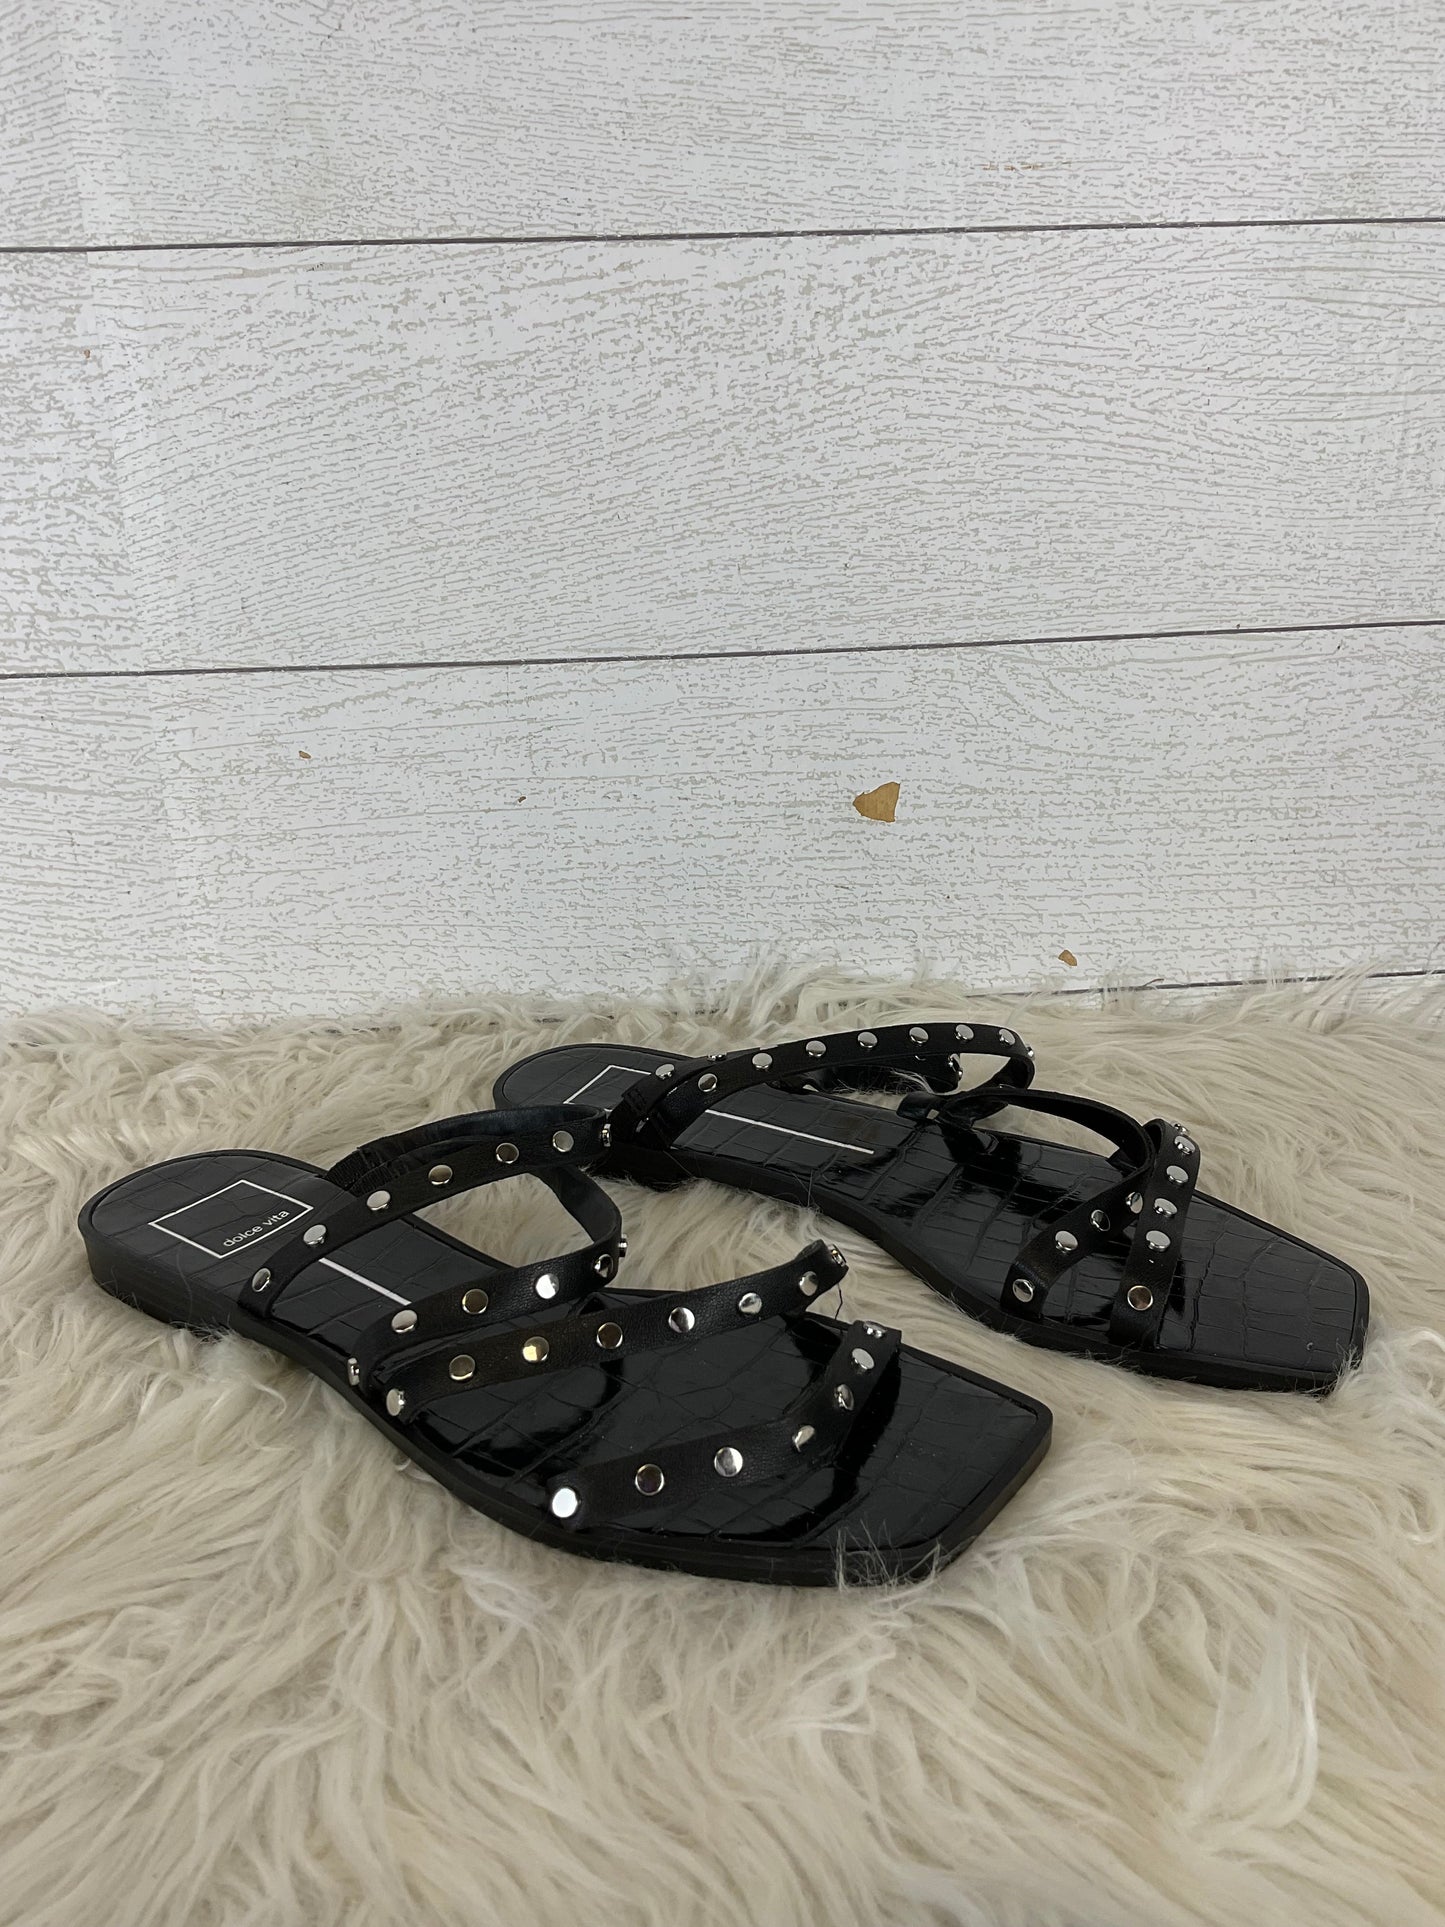 Sandals Flats By Dolce Vita  Size: 10